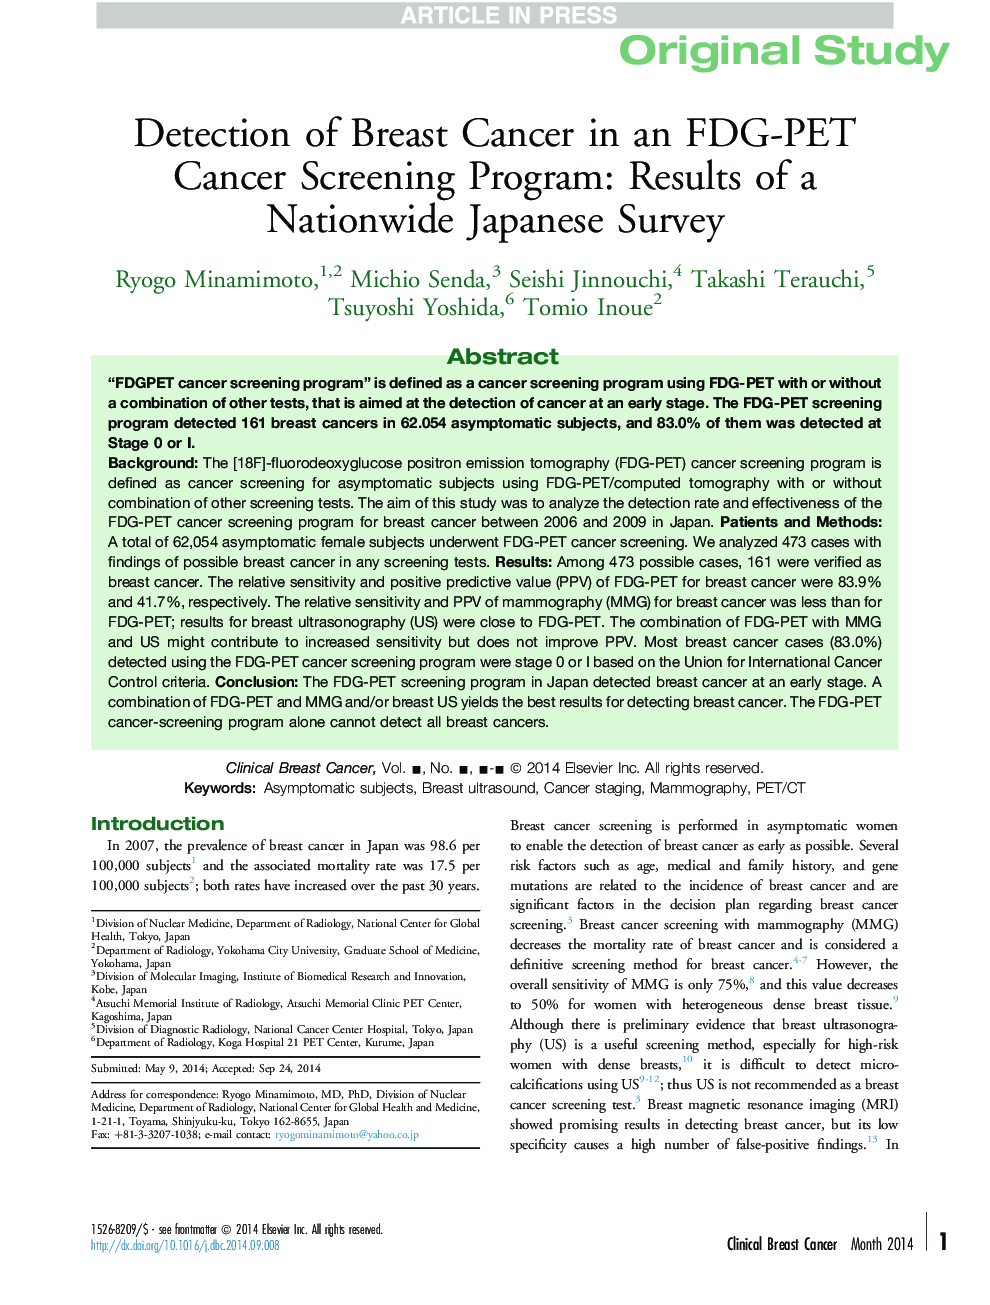 Detection of Breast Cancer in an FDG-PET Cancer Screening Program: Results of a Nationwide Japanese Survey